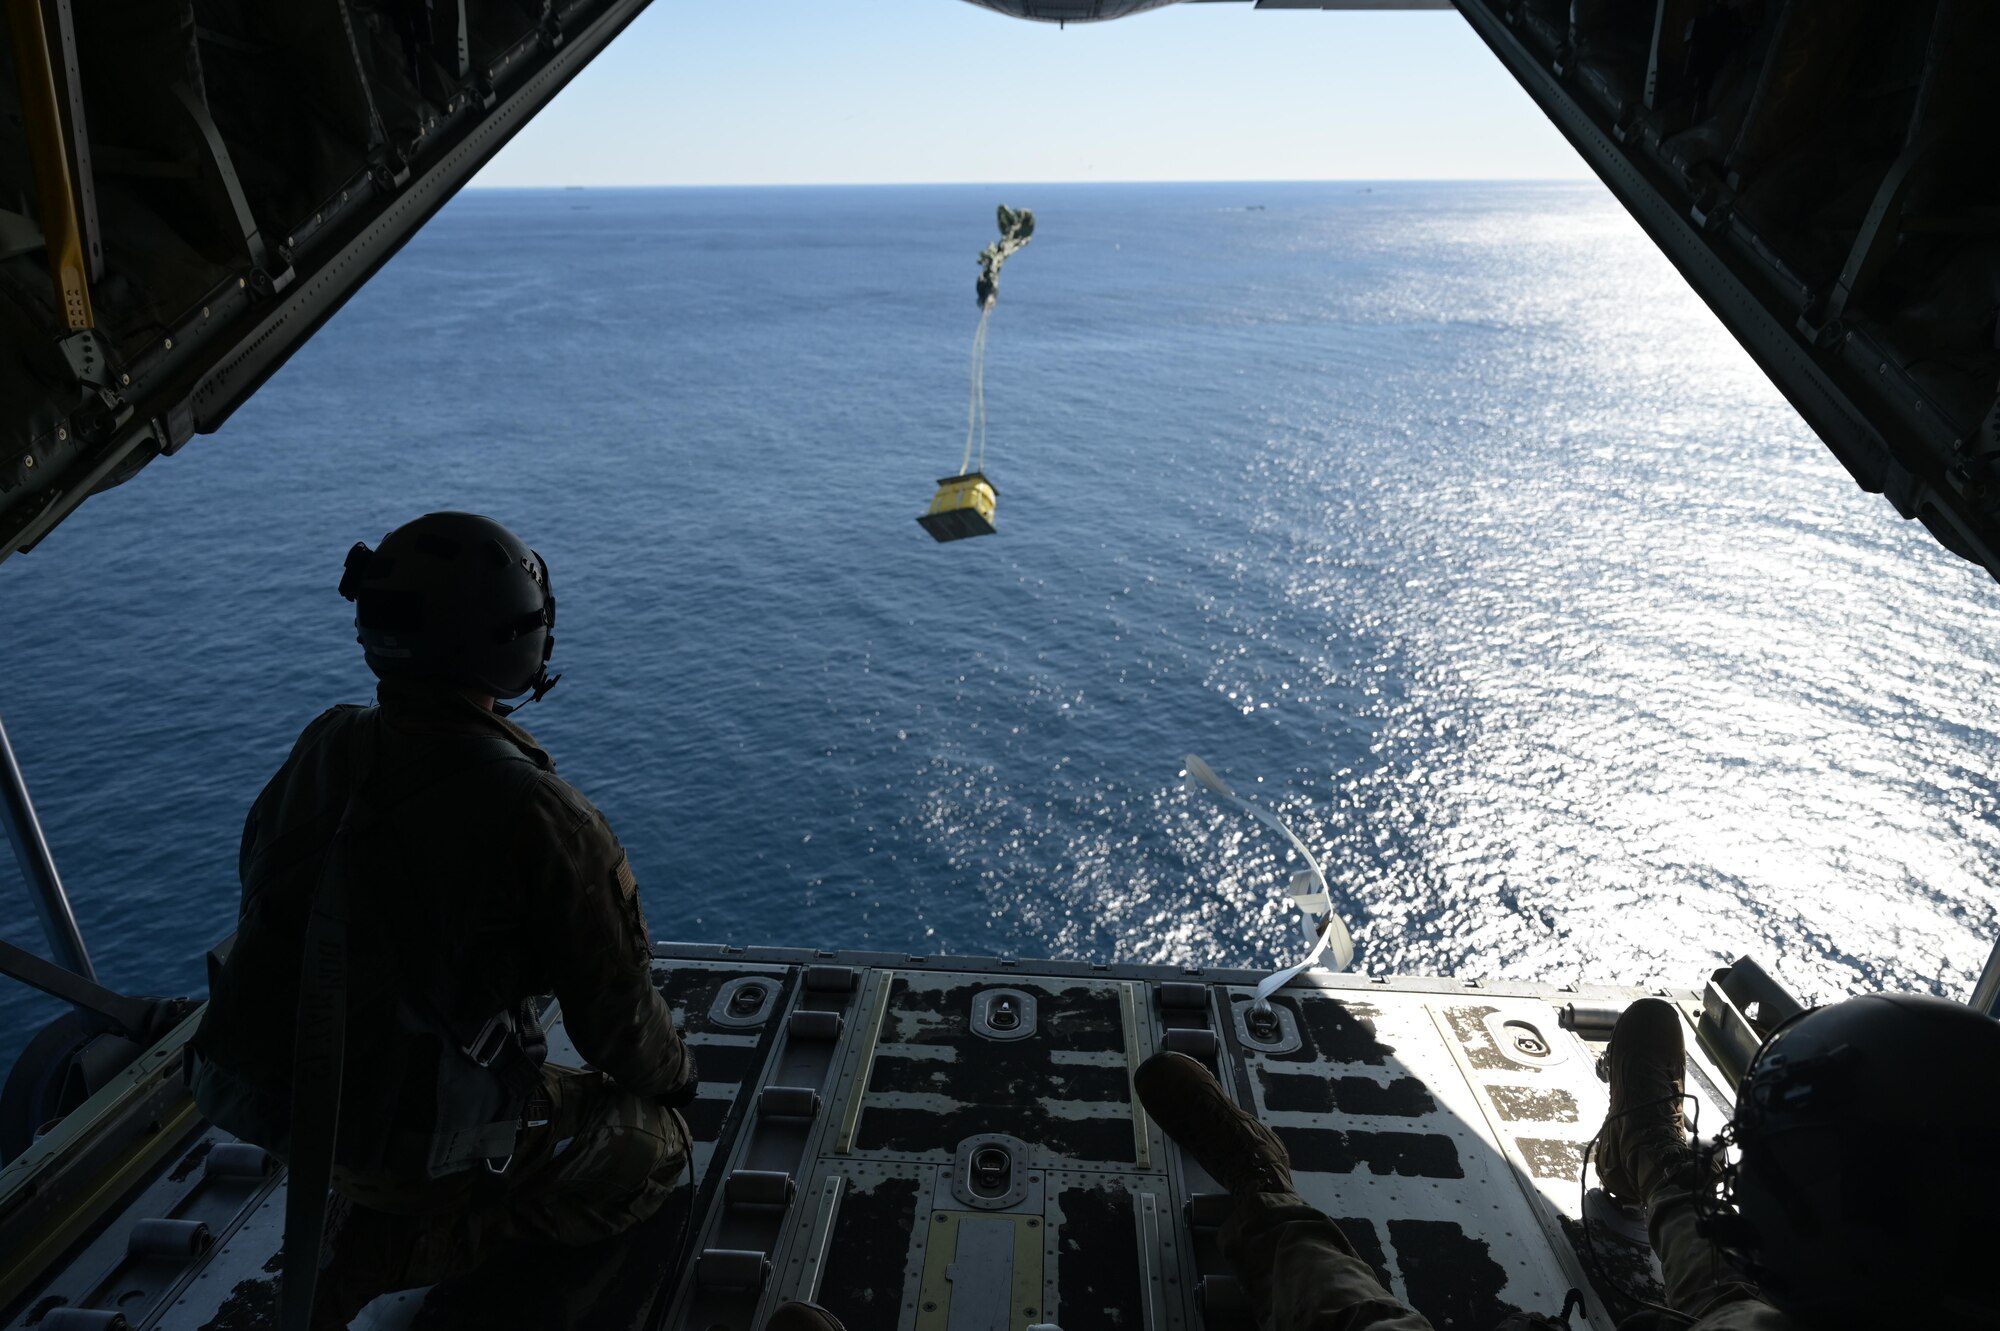 Staff. Sgt. Wesley Zech, left, and Staff Sgt. Mcarthur Posey, loadmasters assigned to the 36th Airlift Squadron, release cargo from a C-130J Super Hercules near the Irozaki Cape, Japan, during exercise Tomodachi Rescue 22 Feb. 11, 2022.